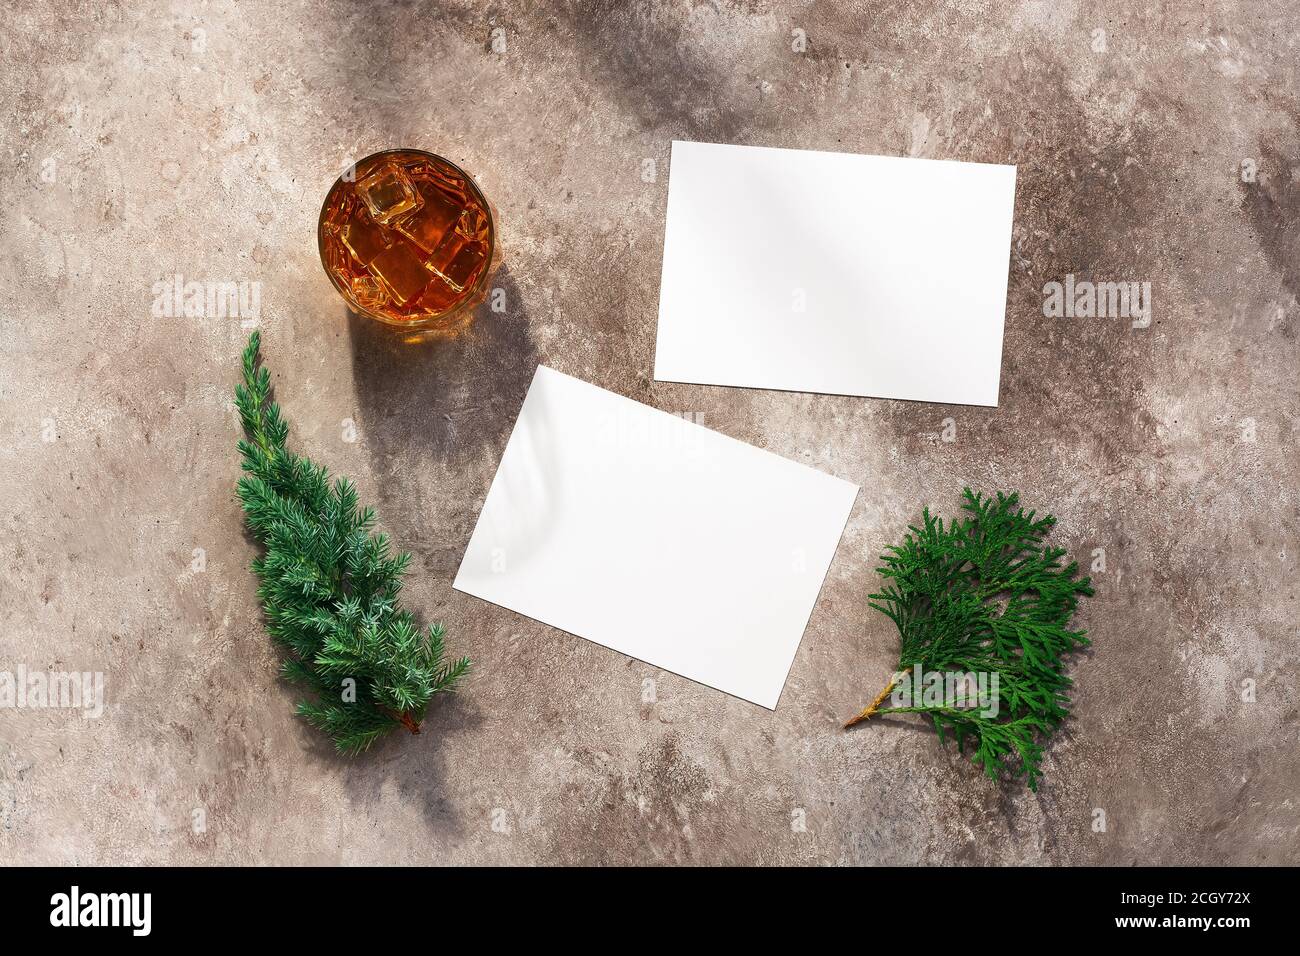 Whiskey glass with ice, blank white business card mockup, coniferous juniper and thuja branches. Male background. Alcohol industry template. Top view, Stock Photo